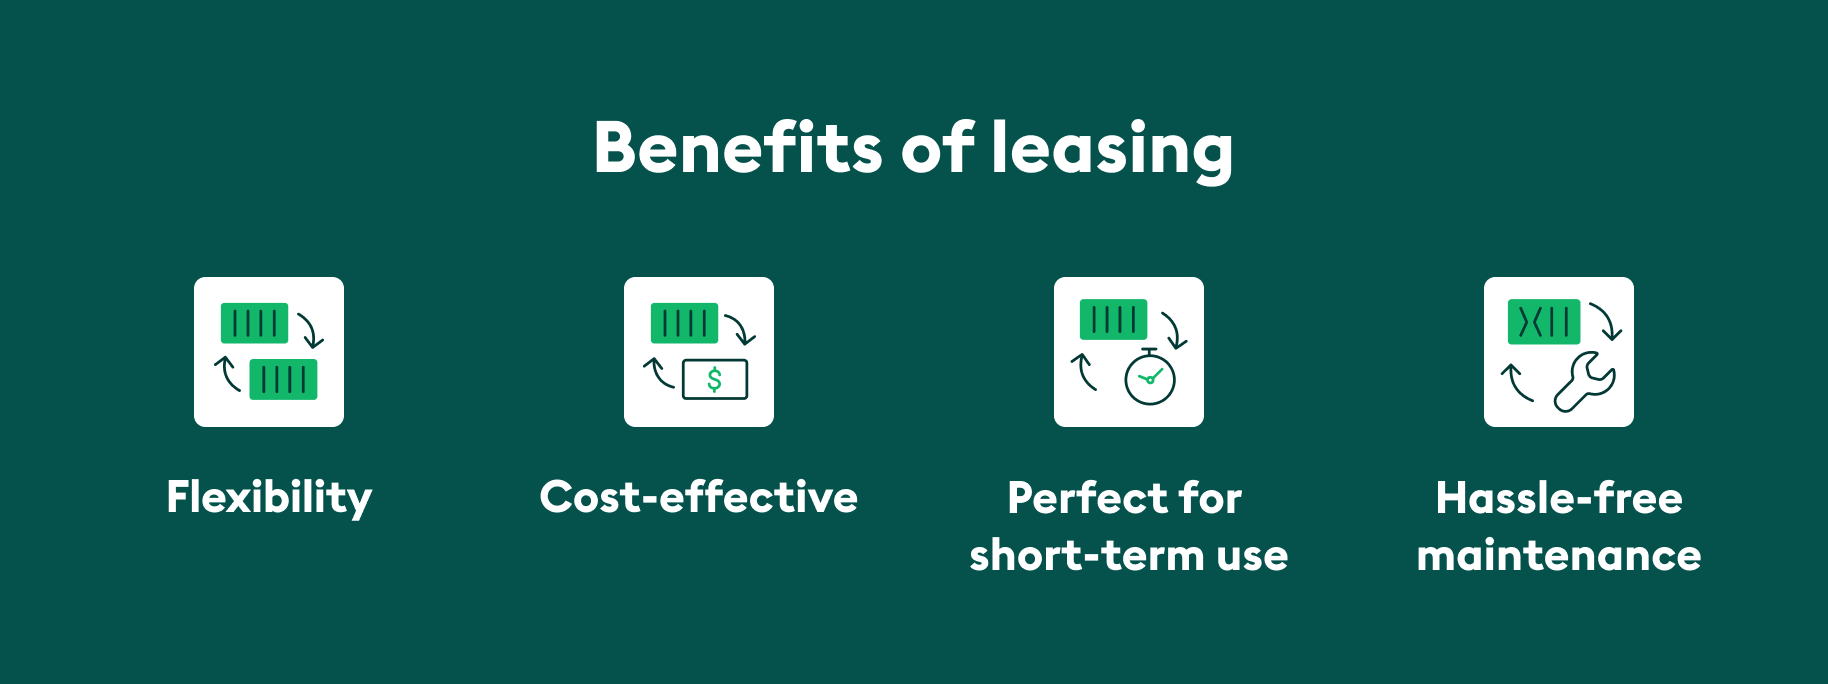 benefits of leasing